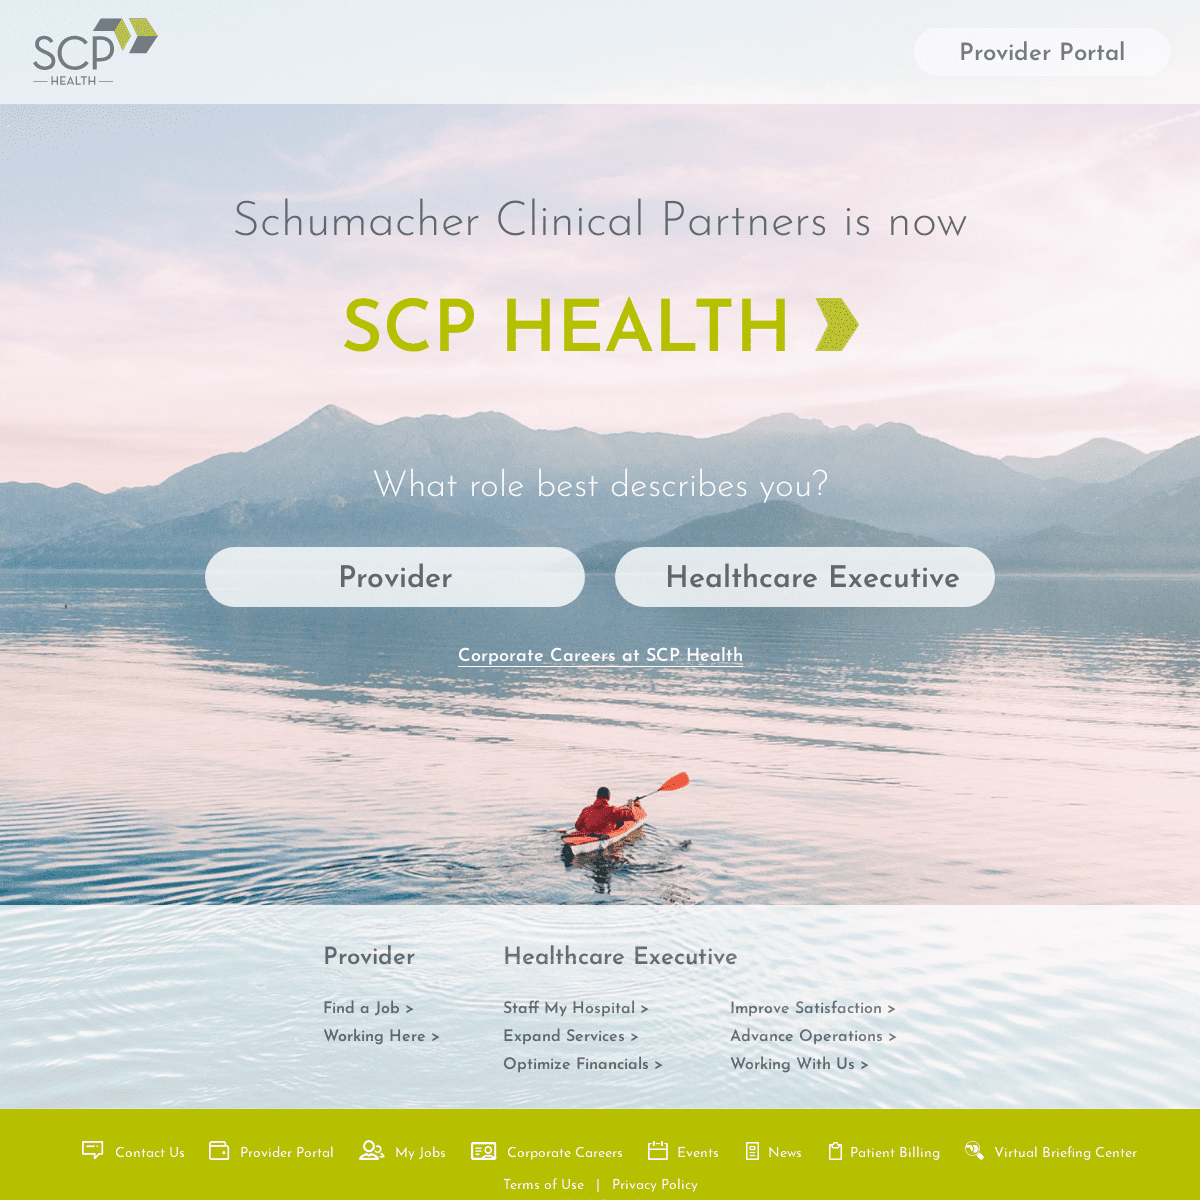 A complete backup of https://scp-health.com